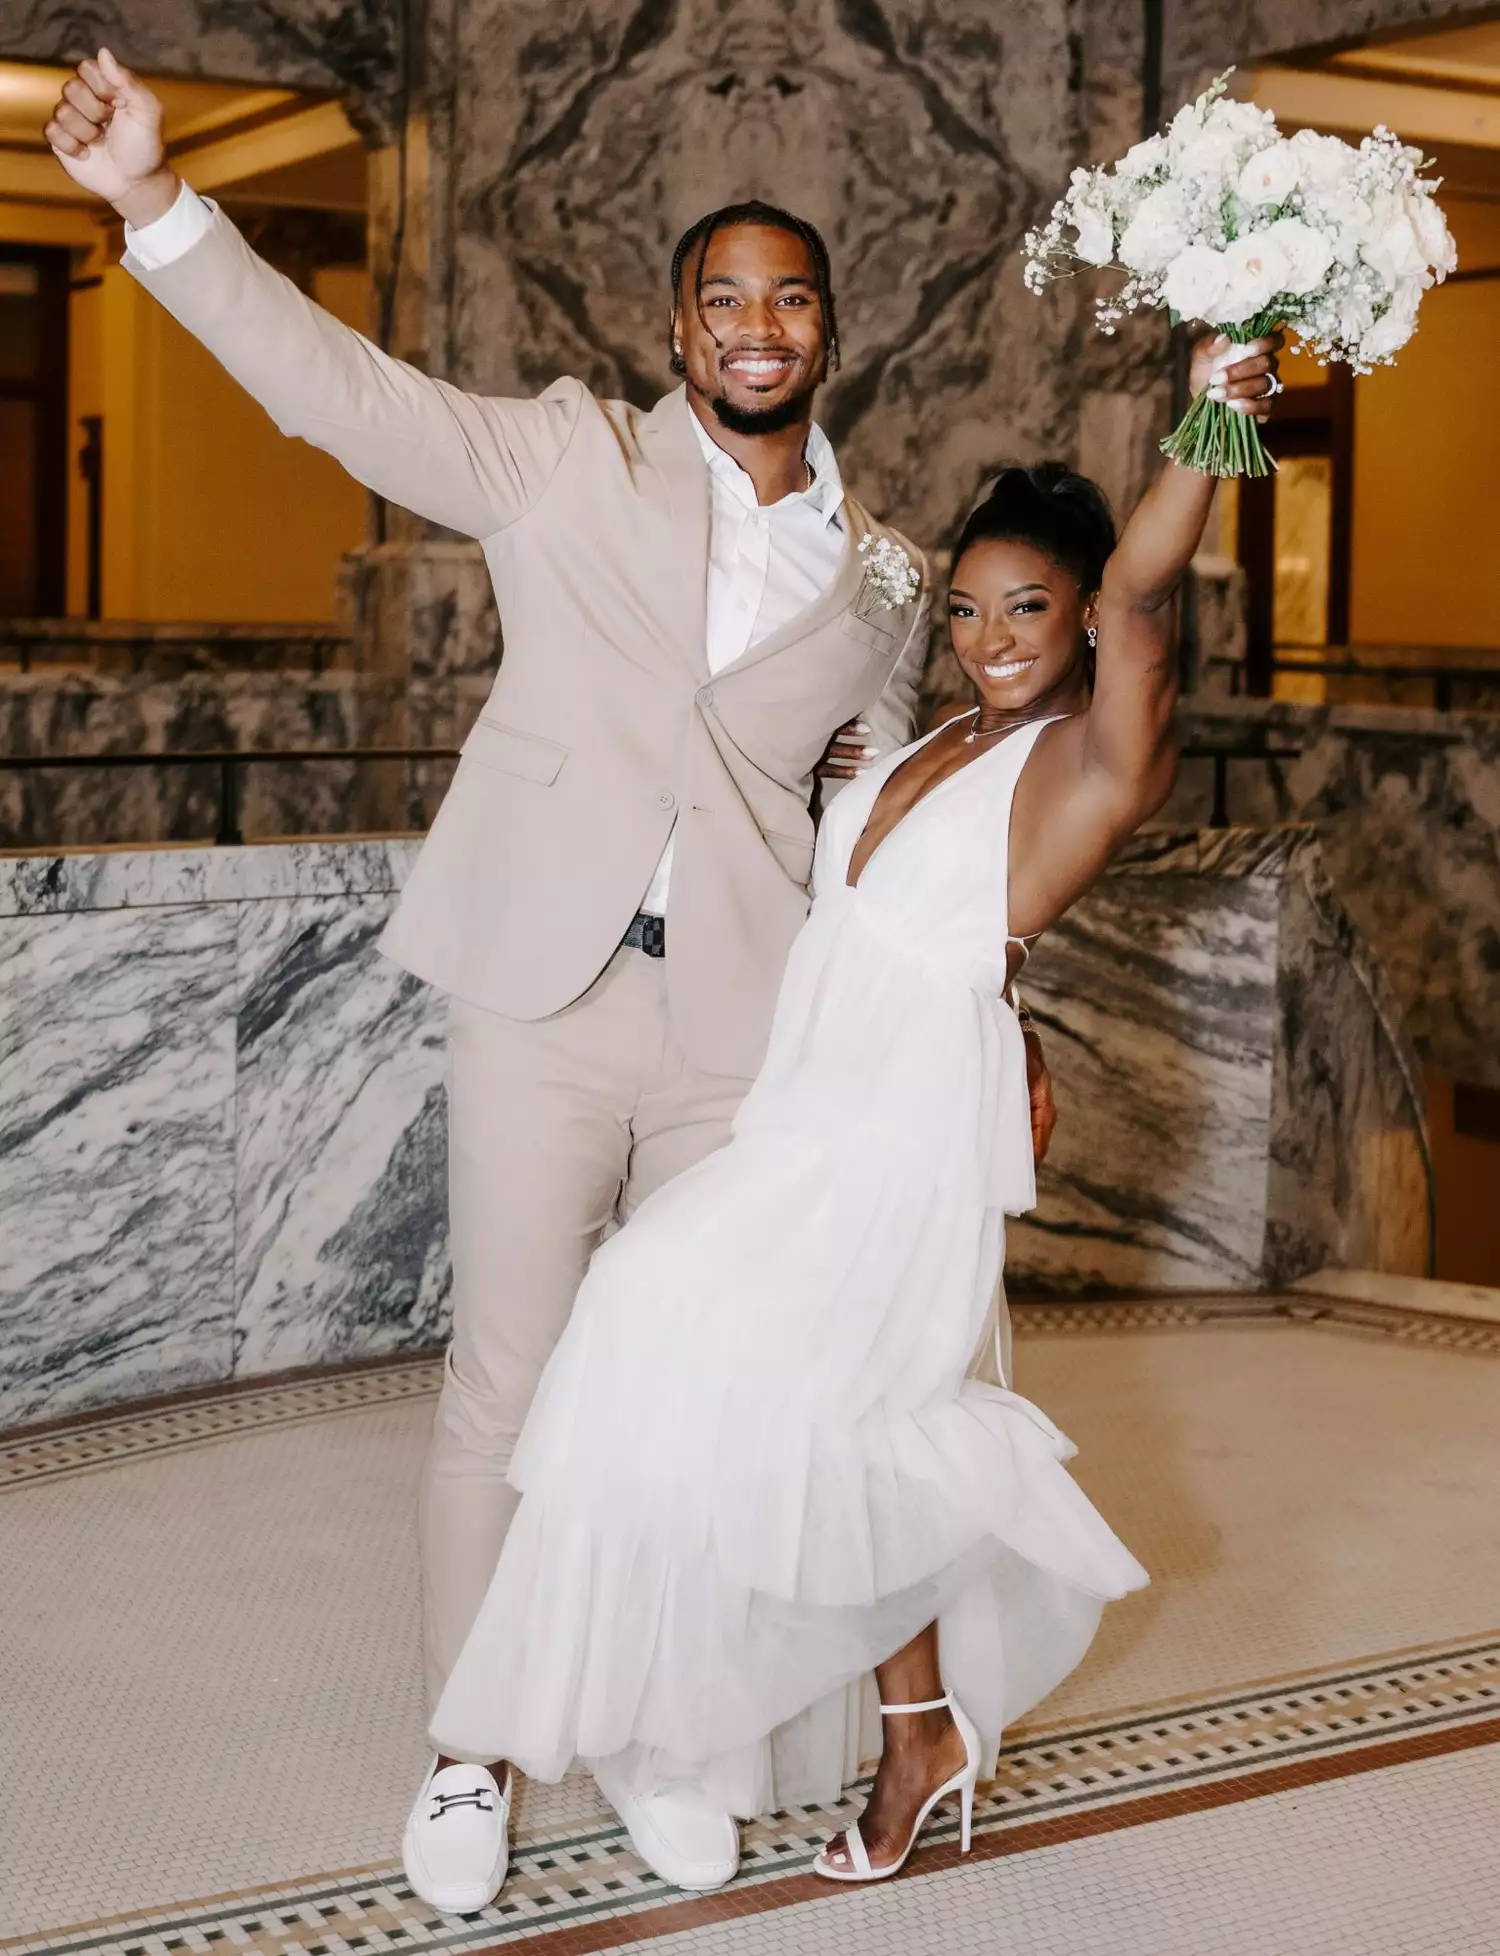 Simone Biles Is Married! The Olympic Gymnast Weds Jonathan Owens in TK Ceremony. Credit: Rachel Taylor